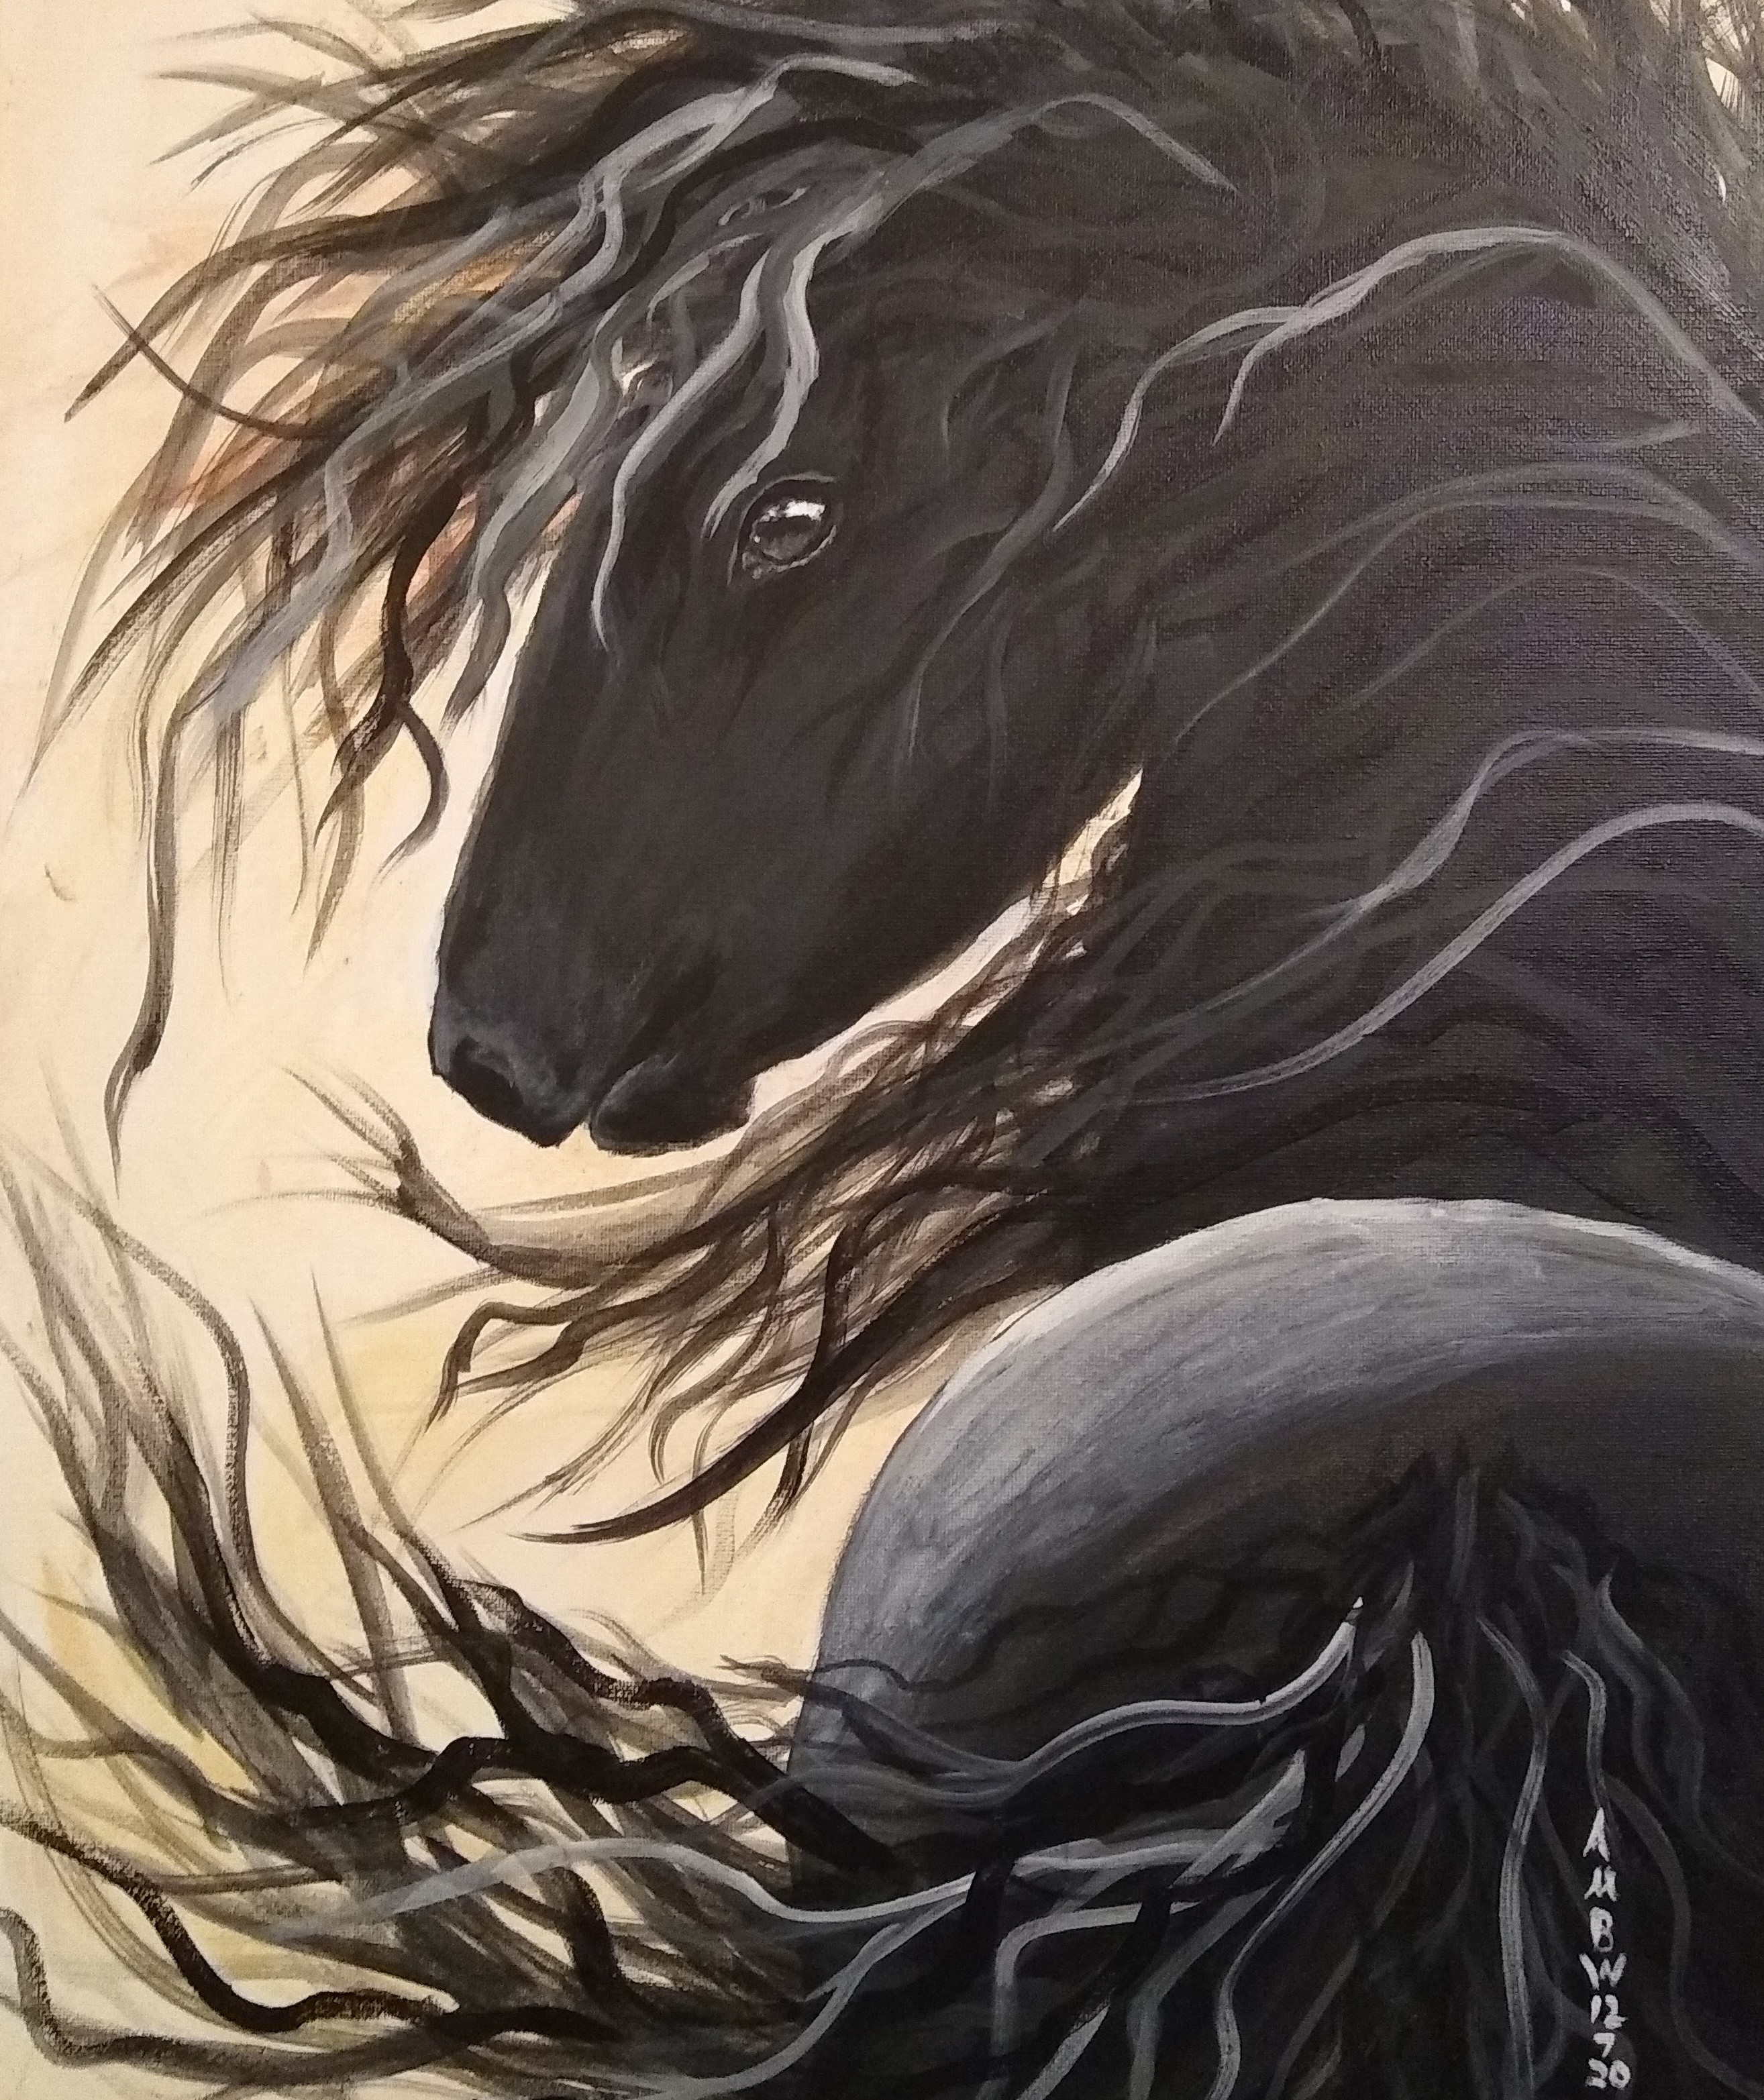 A Beautiful Fantasy Black Horse With Wild Mane experience project by Yaymaker